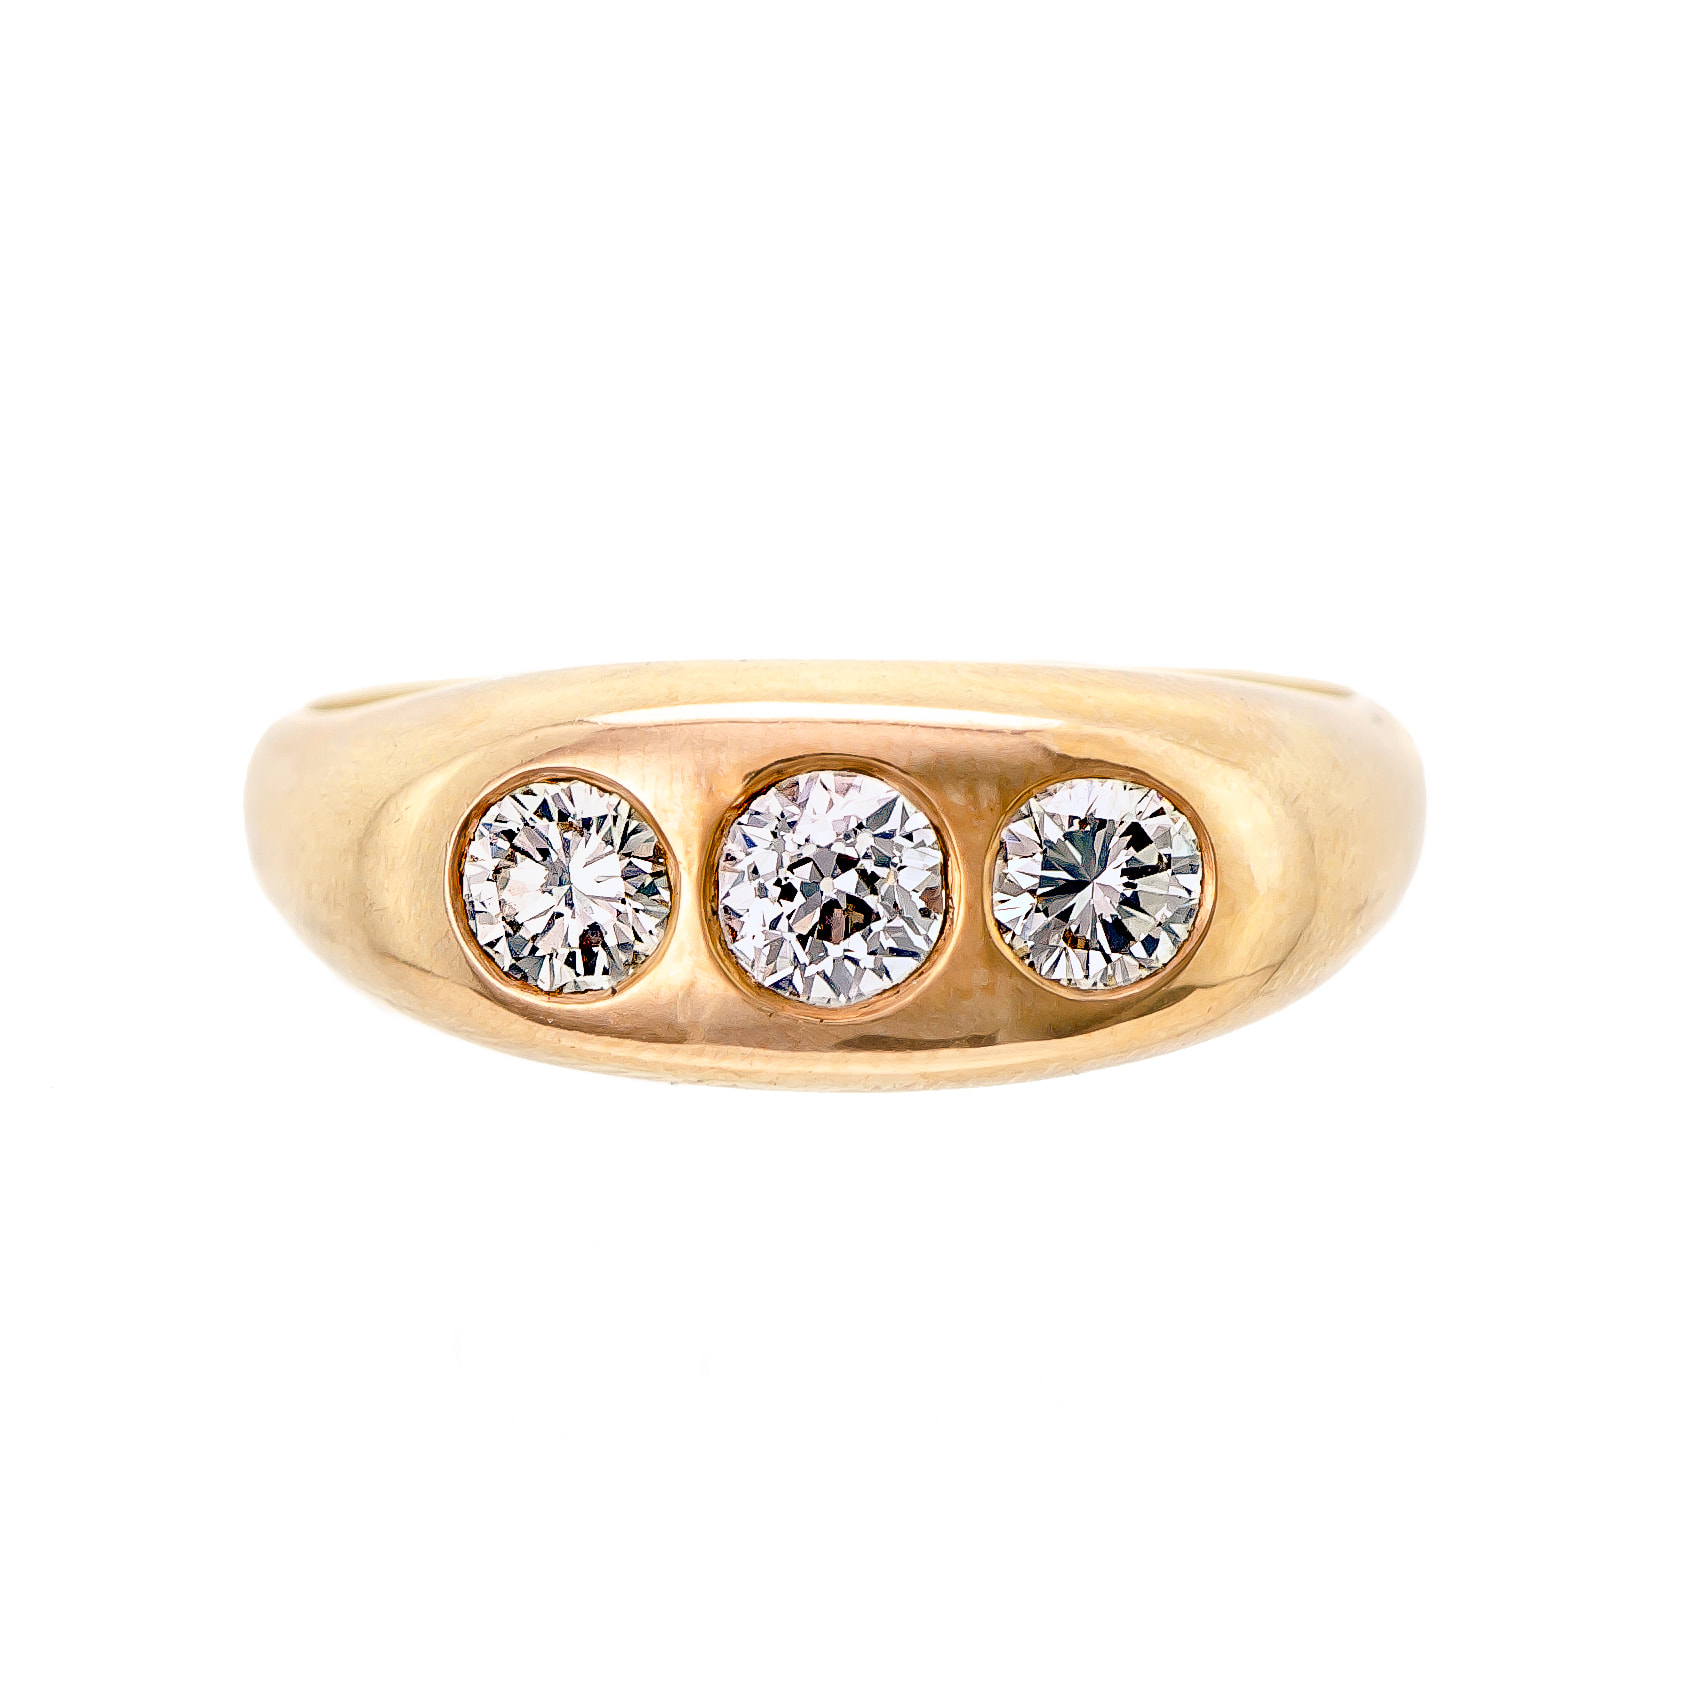 MEN'S WHITE GOLD FASHION RING WITH 9 CLUSTER SET DIAMONDS, .61 CT TW -  Howard's Jewelry Center